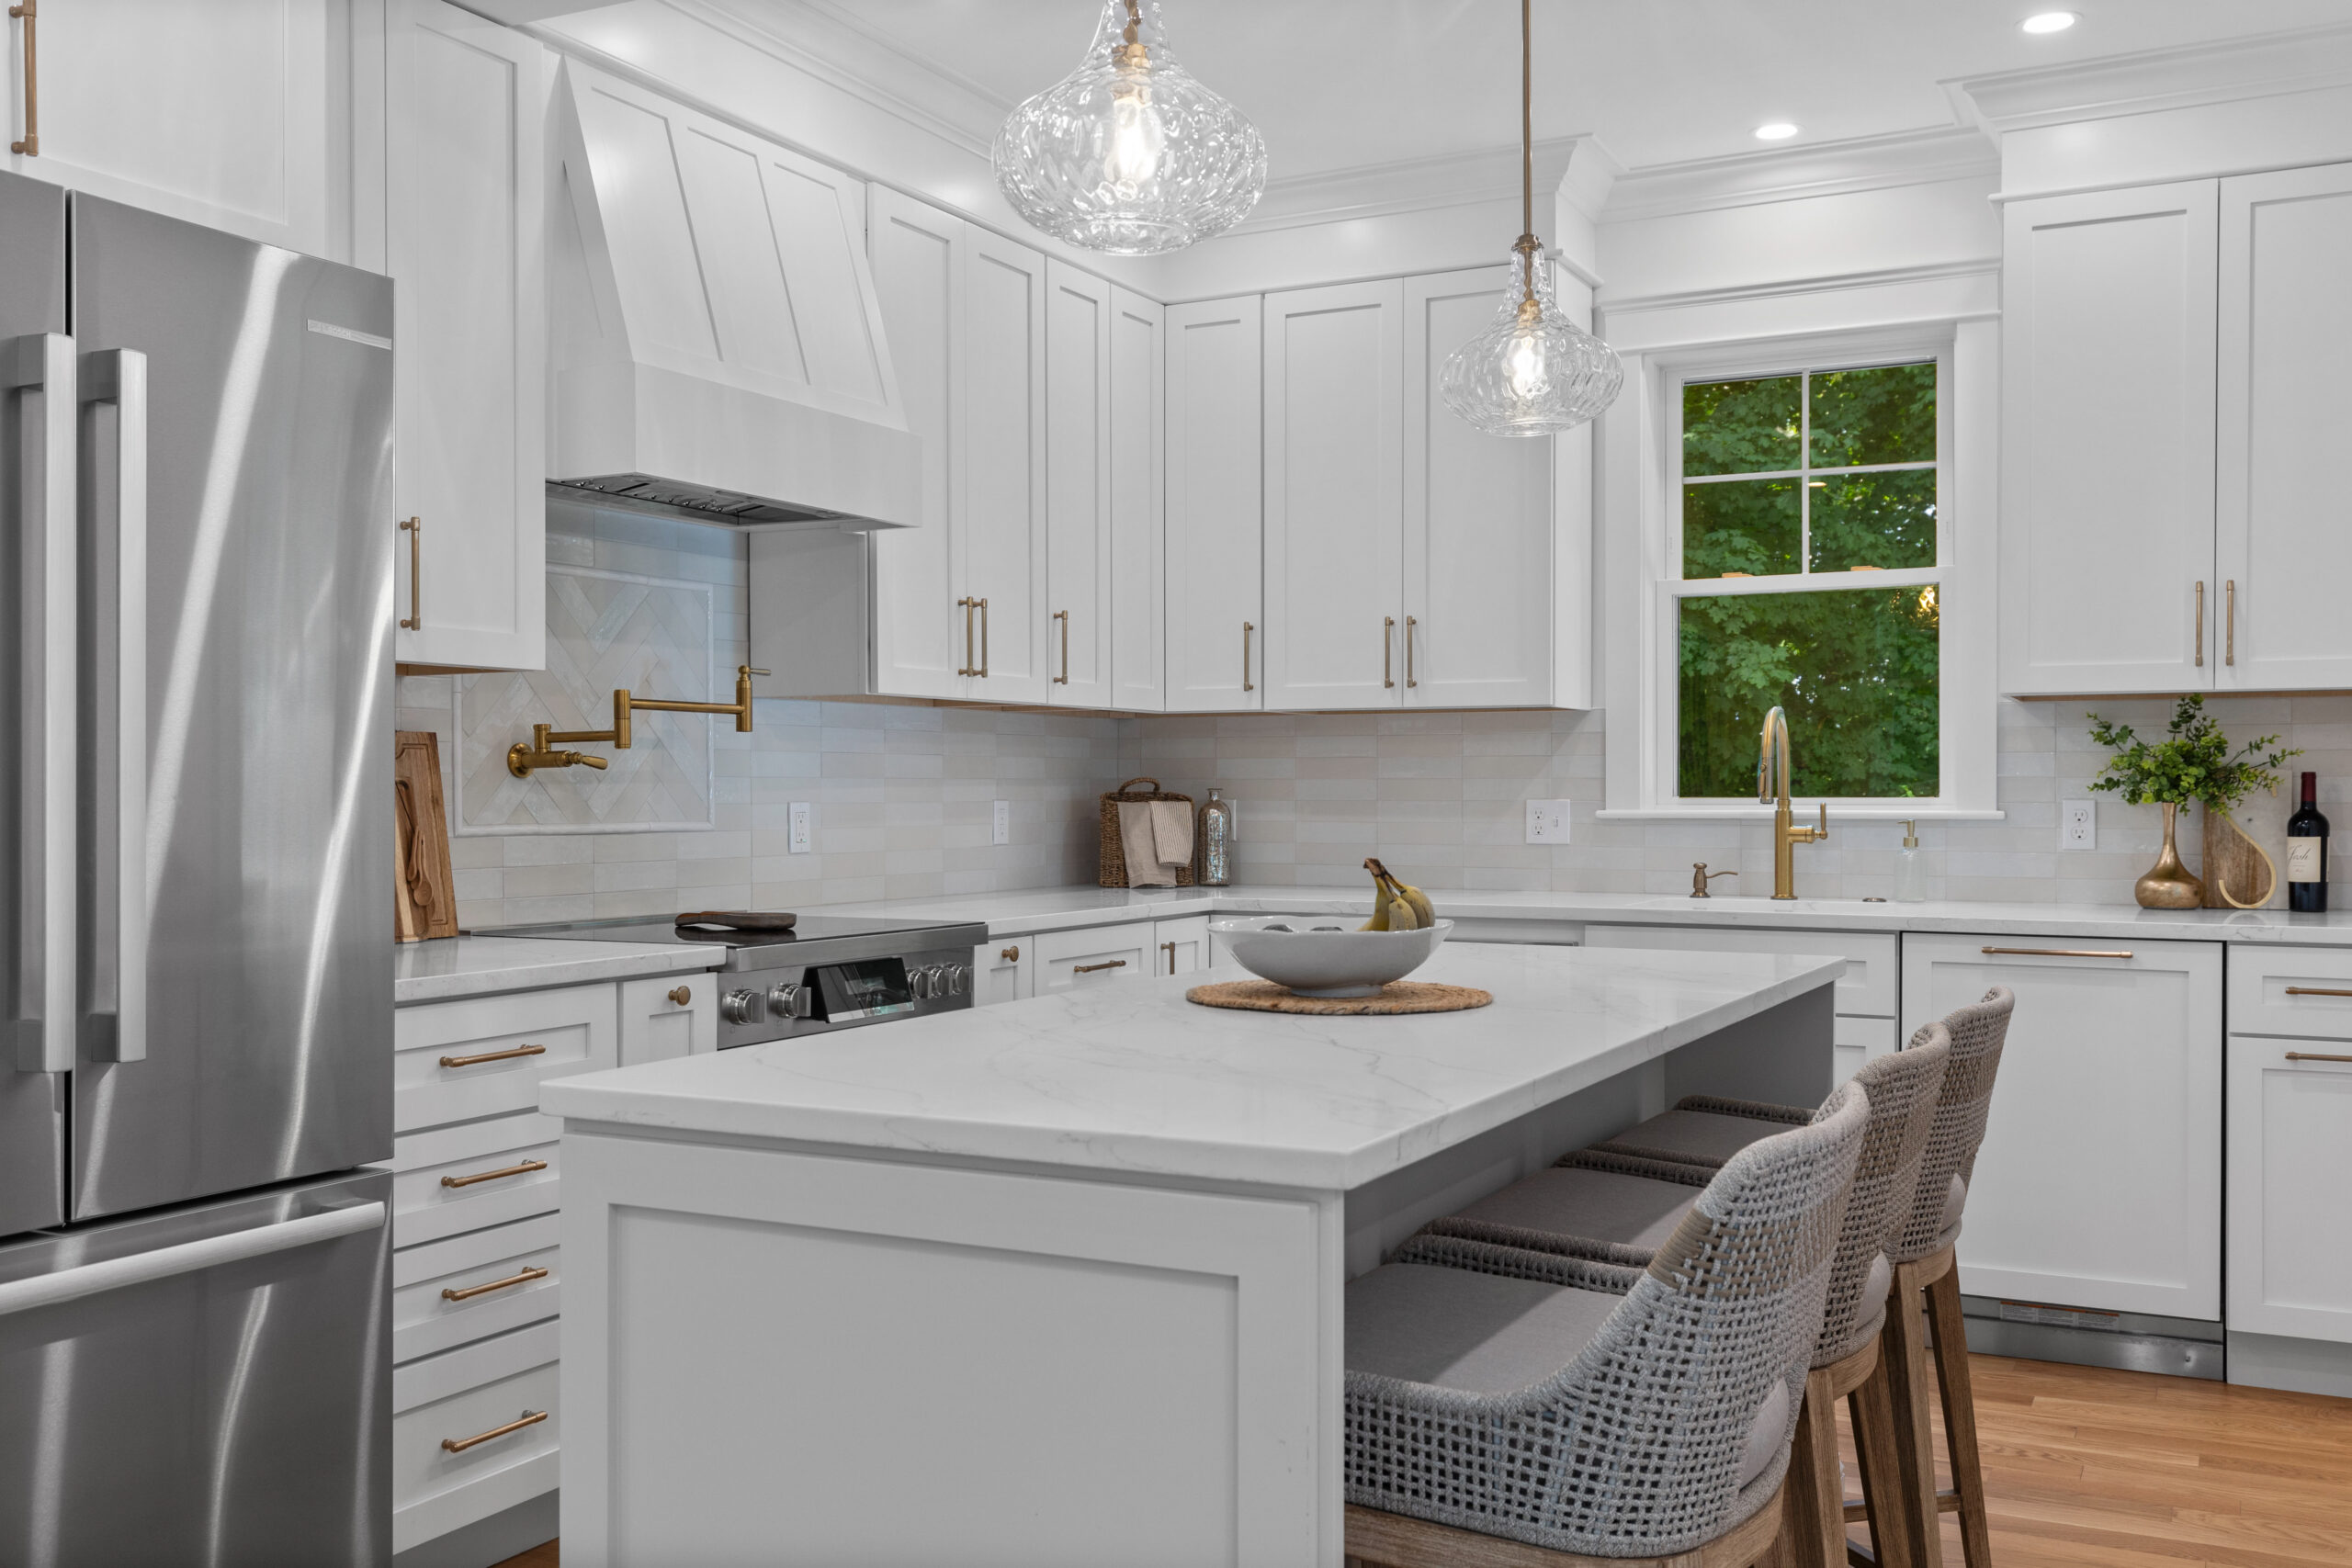 Image of a beautifully renovated kitchen in a vintage New England home. The kitchen features a large island with seating, white shaker cabinets, and stainless steel appliances. The space is illuminated by pendant lights and recessed lighting, with natural light streaming in from large windows, creating a bright and welcoming atmosphere.